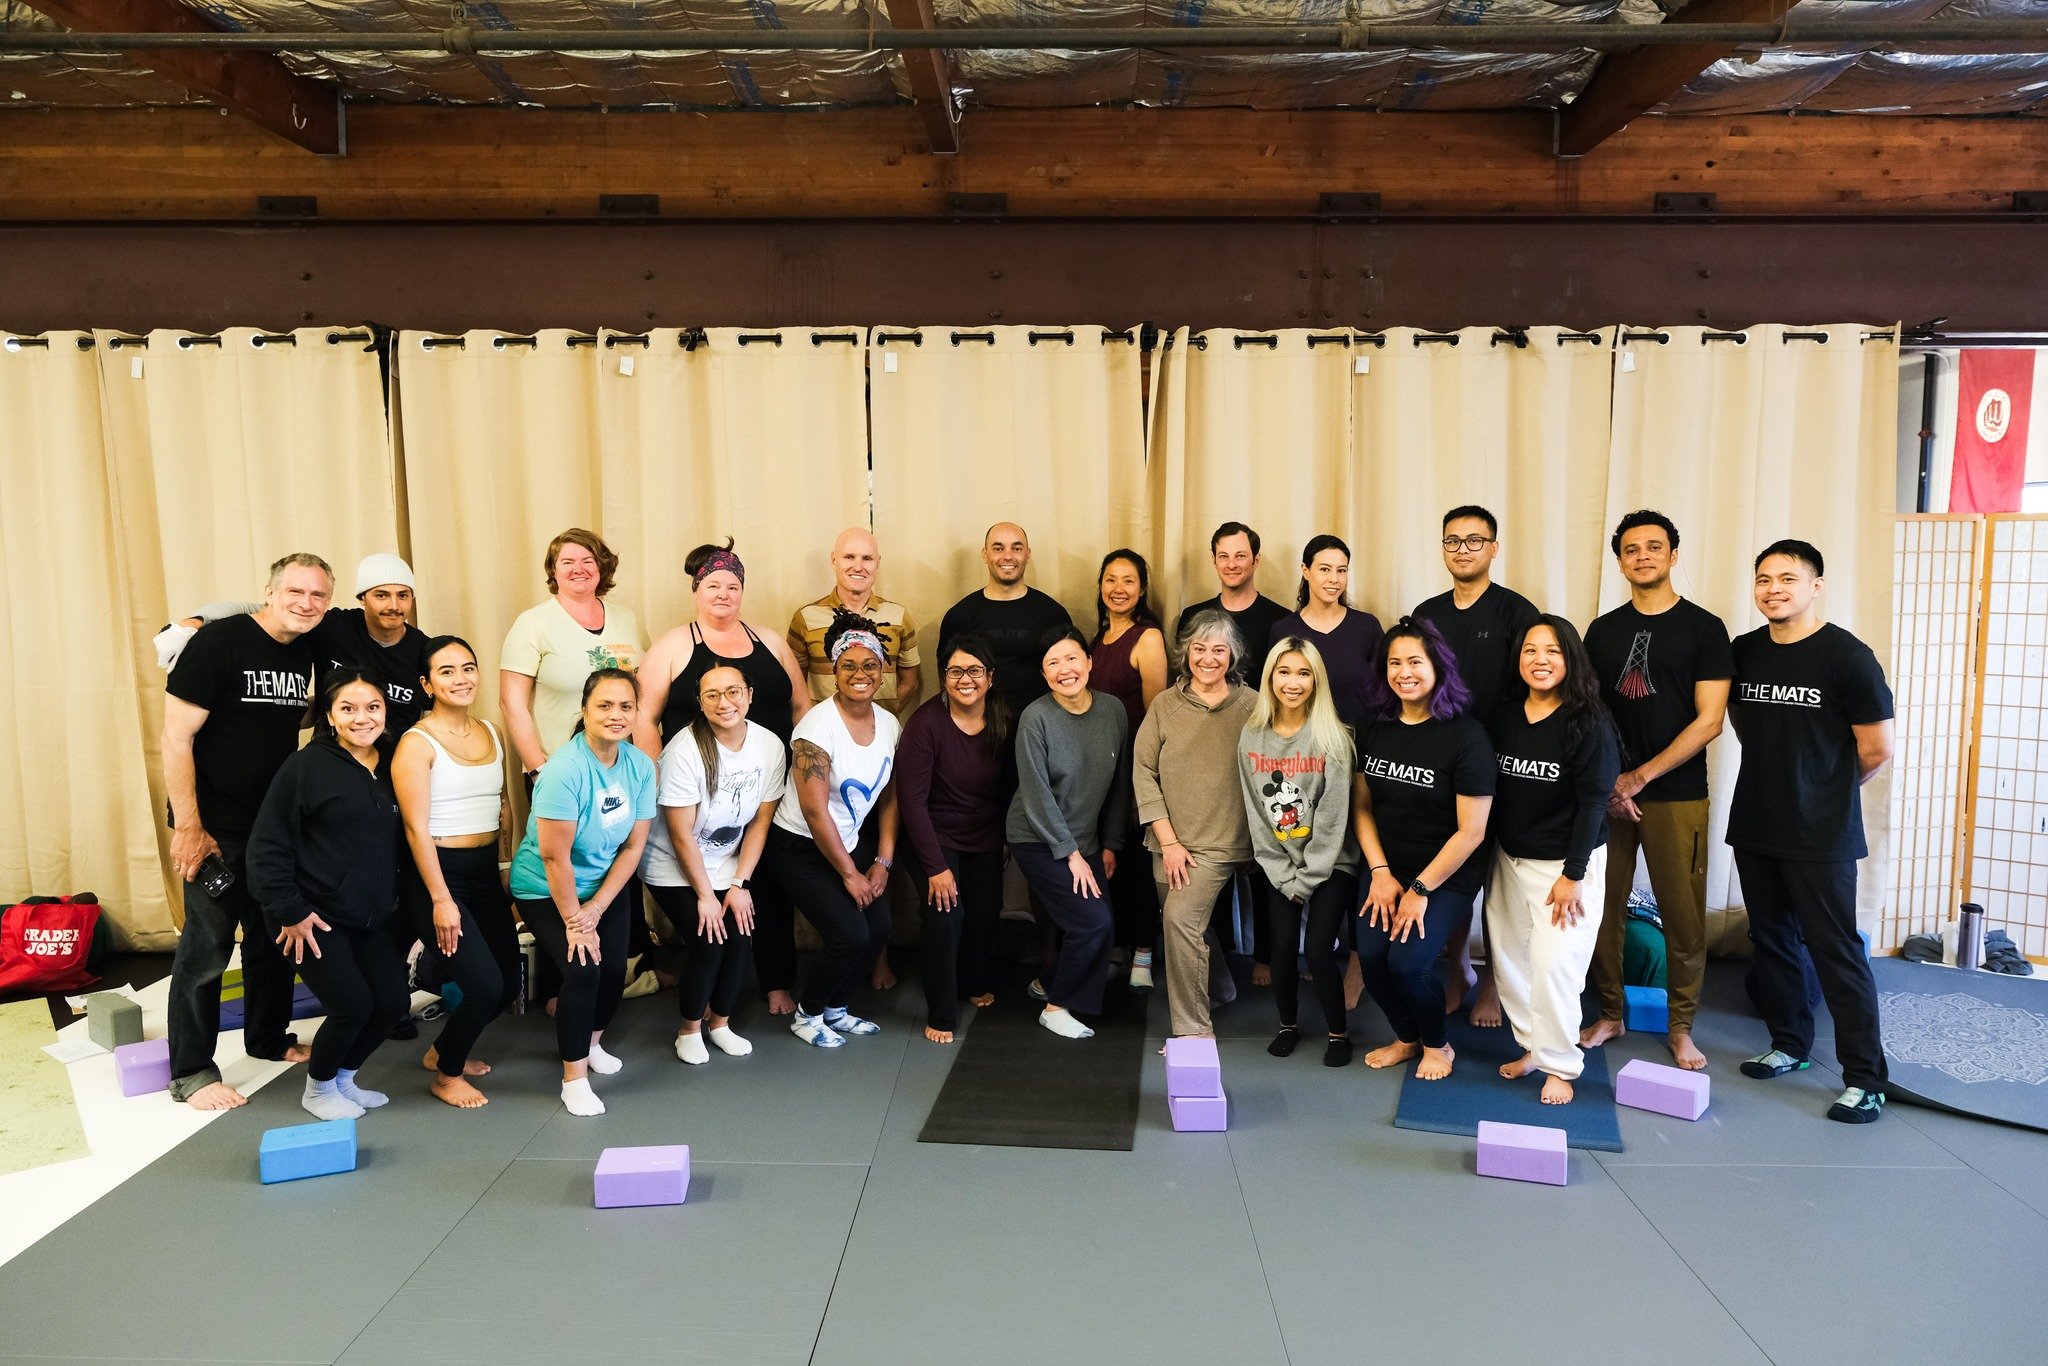 Thank you to everyone who came thru to ZenDaze!

***SWIPE FOR EVENT PHOTOS***

It started with &quot;How do we serve our community more than just thru yoga classes?&quot; From this, ZenDaze was born as a way to connect with all of you! Thank you for 